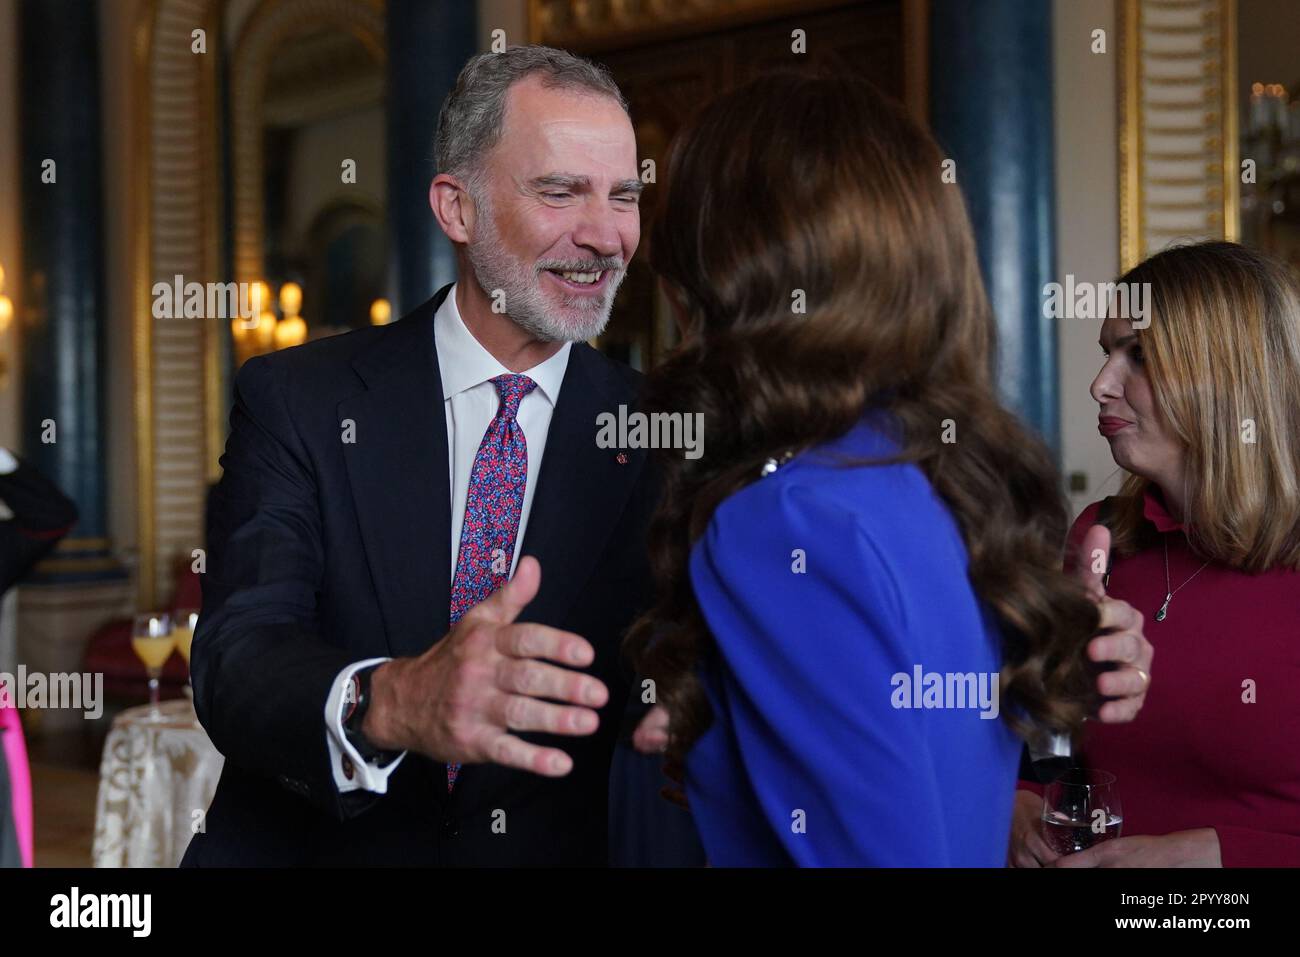 King Felipe VI of Spain greets the Princess of Wales, during a reception at Buckingham Palace, in London, for overseas guests attending the coronation of King Charles III. Picture date: Friday May 5, 2023. Stock Photo